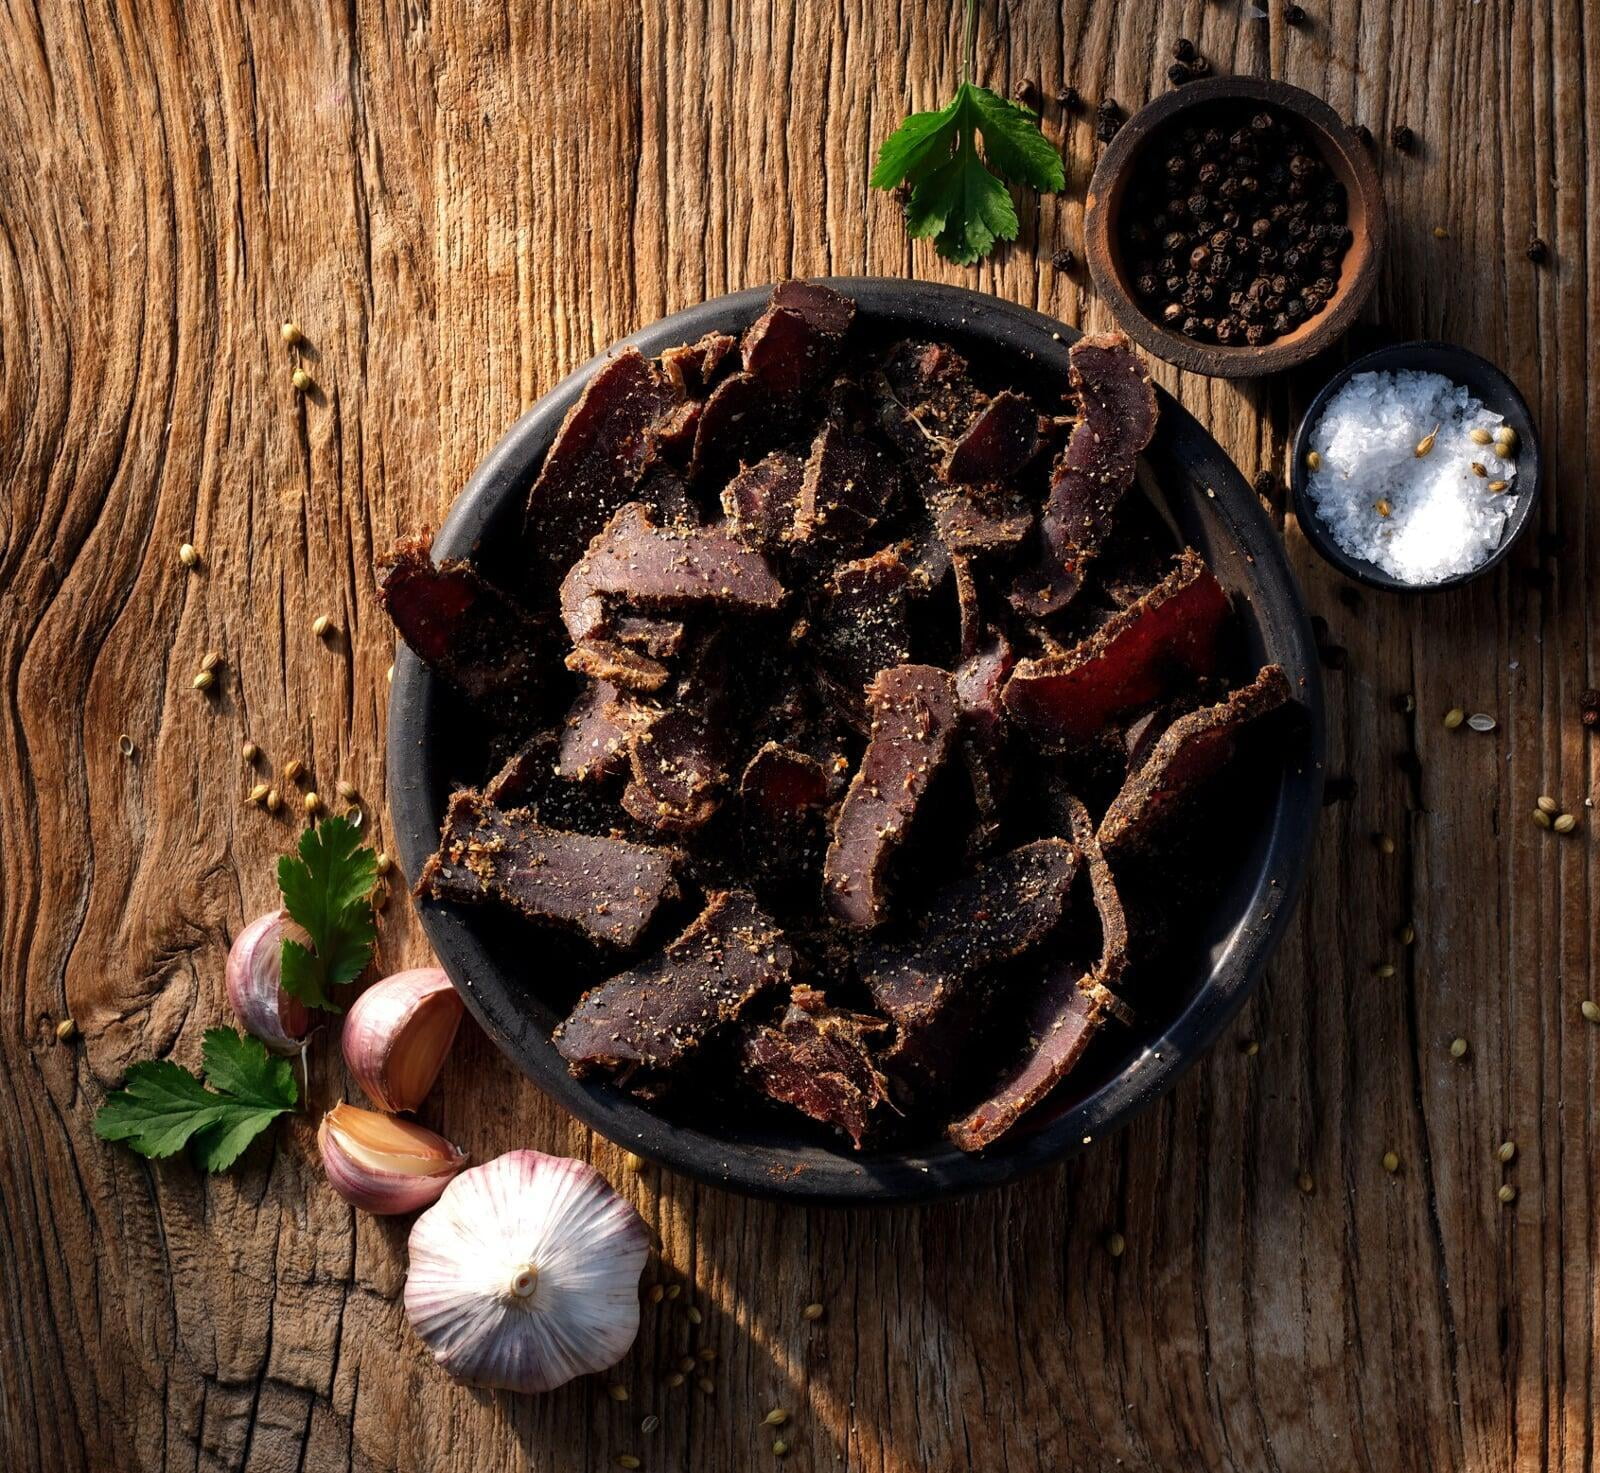 Biltong: A South African Delicacy Taking the World by Storm